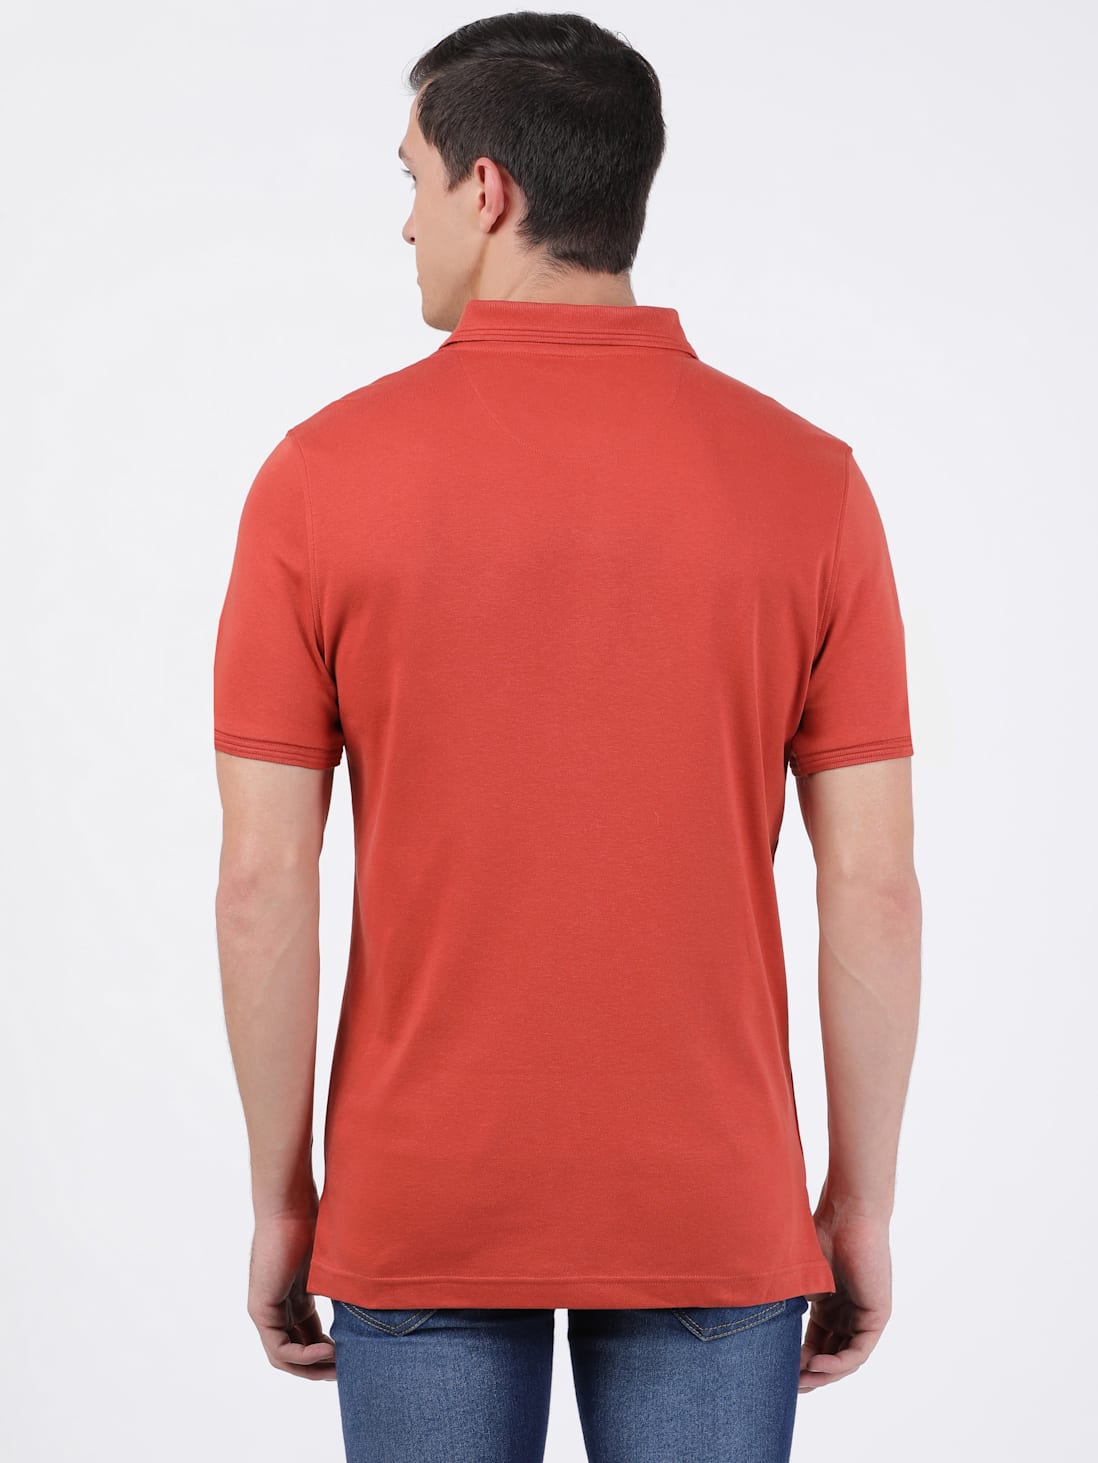 Solid Men 100% Cotton Super Combed Polo Neck Beige with Red & Black tipping  T-Shirt Half Sleeve